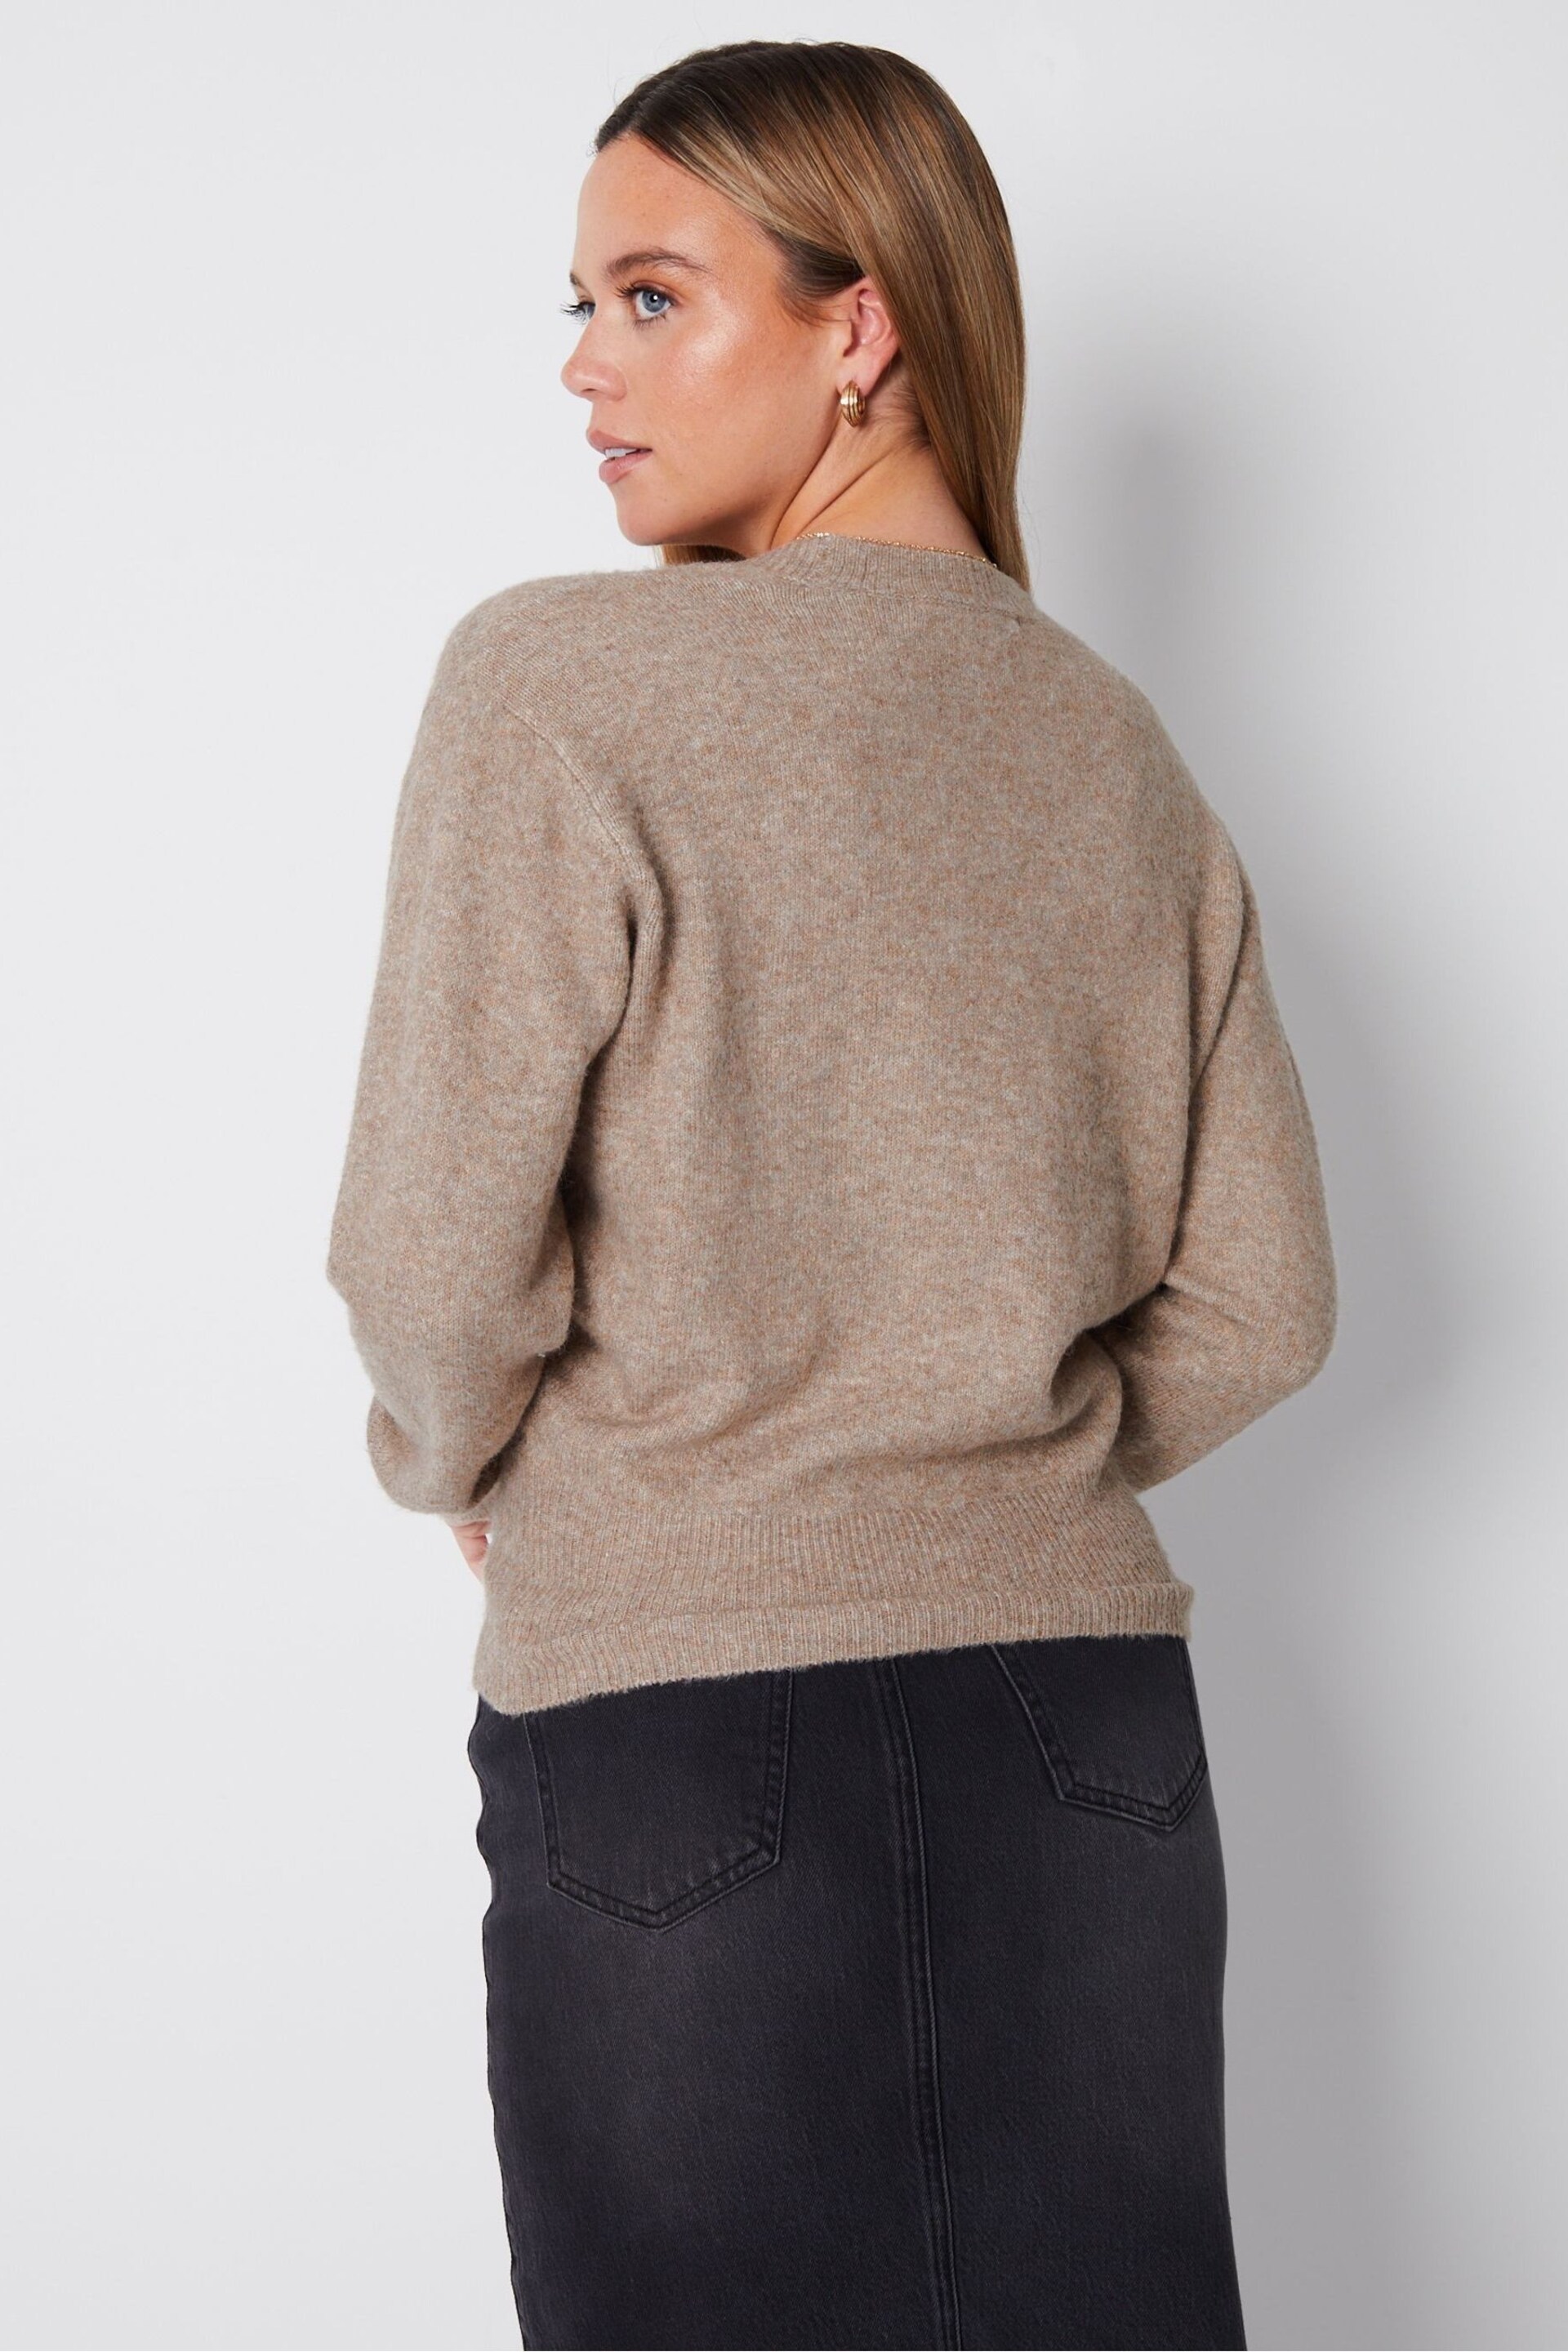 Threadbare Brown Wrap Front Knitted Jumper - Image 2 of 4